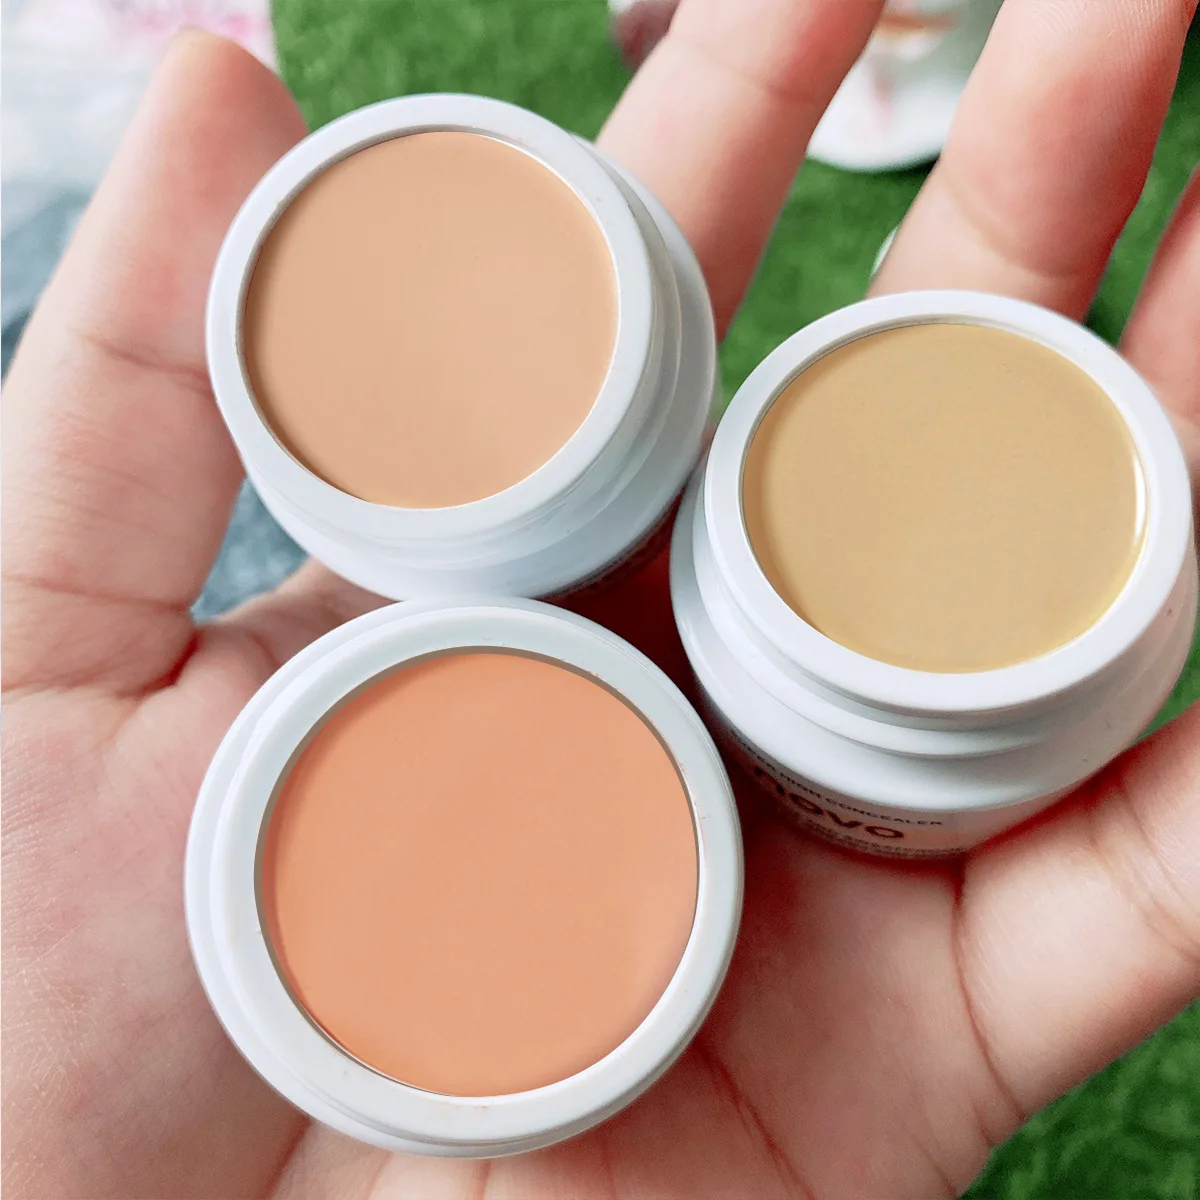 

NOVO Brightening Concealer Waterproof and Sweat Resistant Strongly Covers Spots Facial Acne Marks Dark Circles Face Makeup